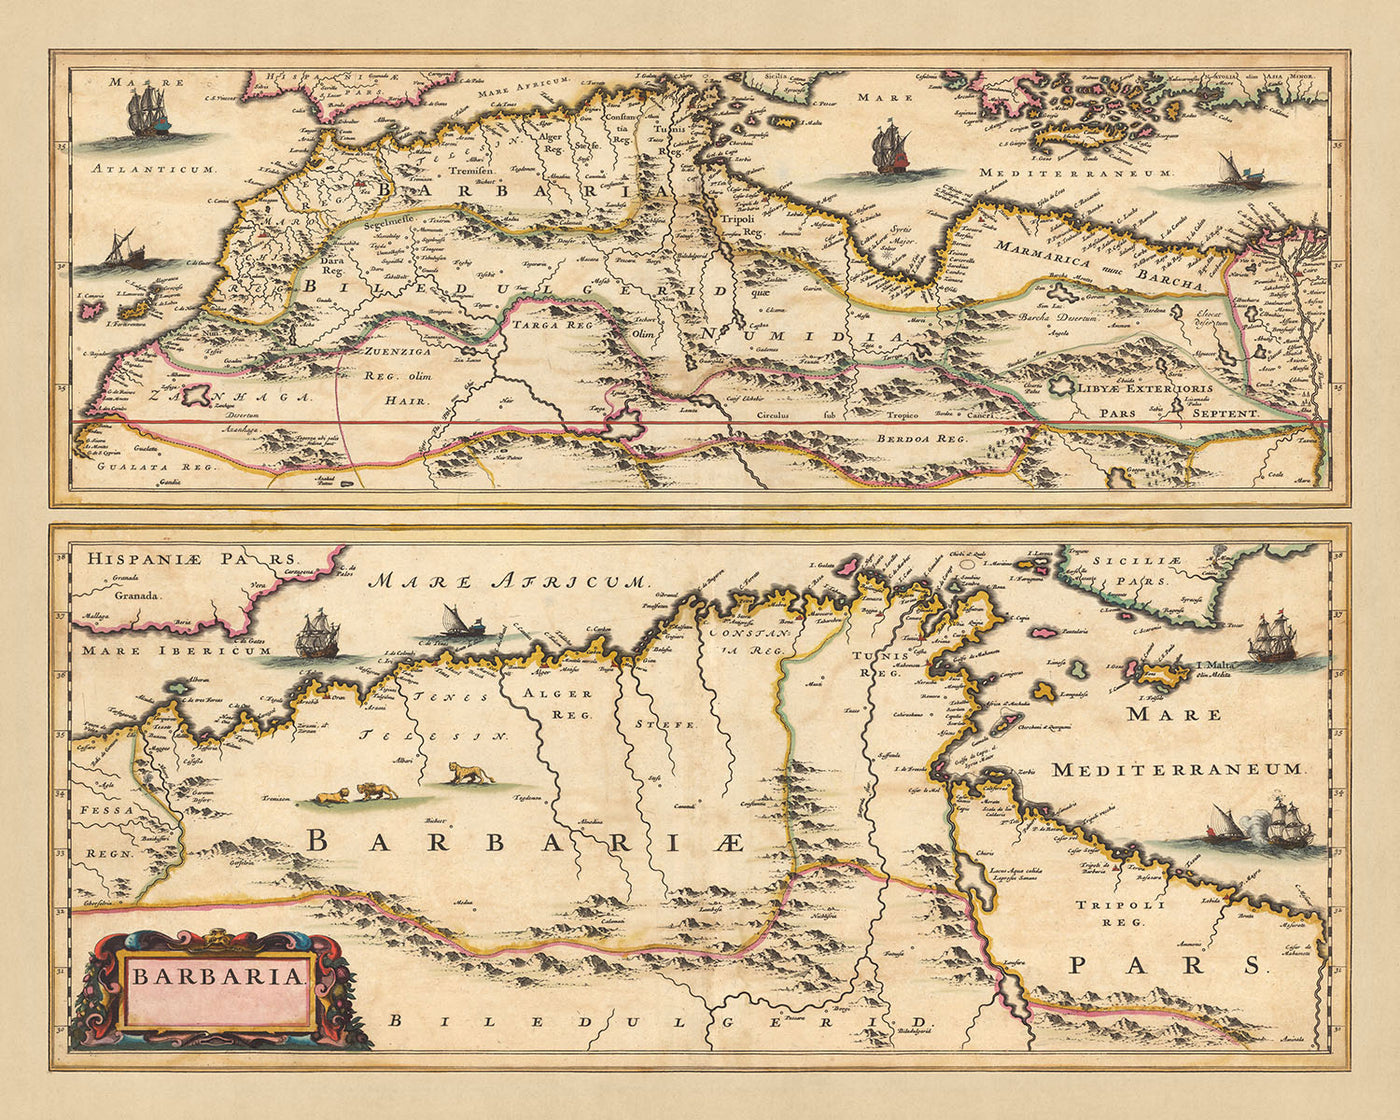 Old Map of Barbary by Visscher, 1690: Barbarians, Algiers, Tunis, Cairo, Canary Islands, Sahara Desert